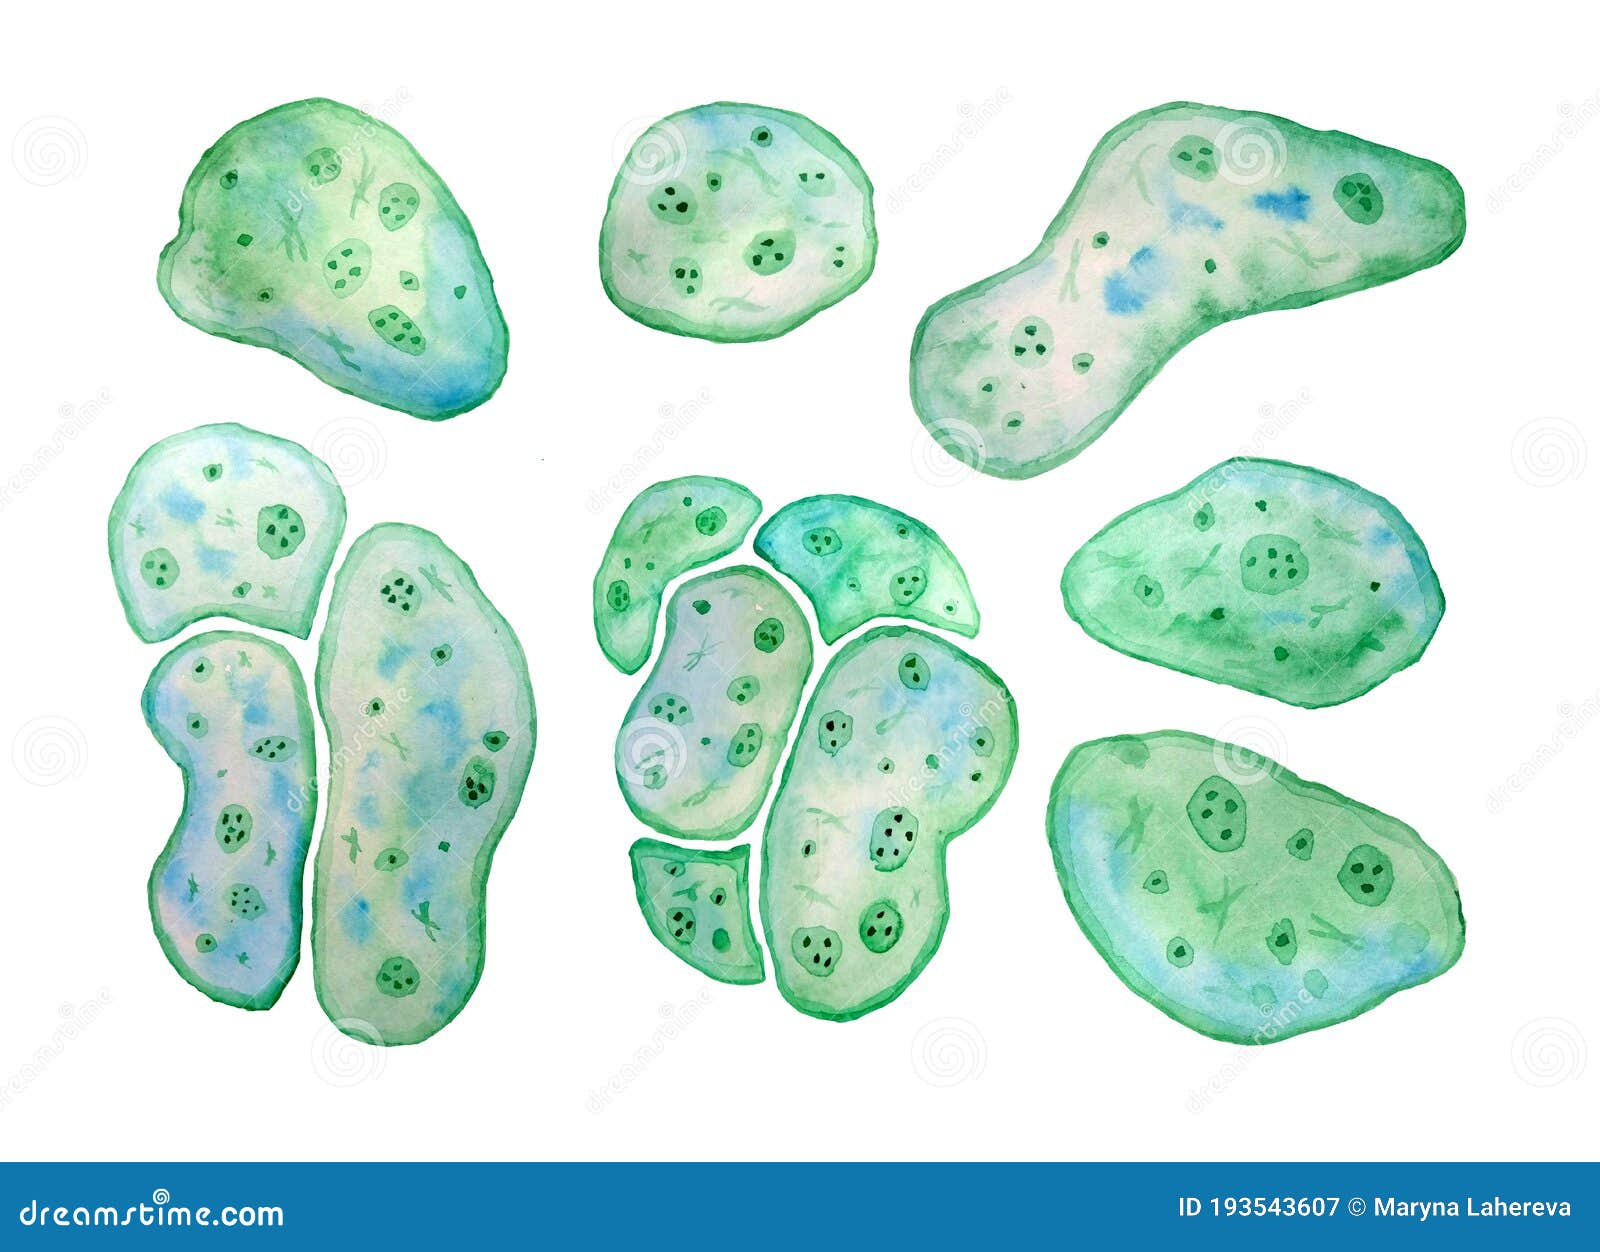 unicellular green blue algae chlorella spirulina with large cells single-cells with lipid droplets. watercolor